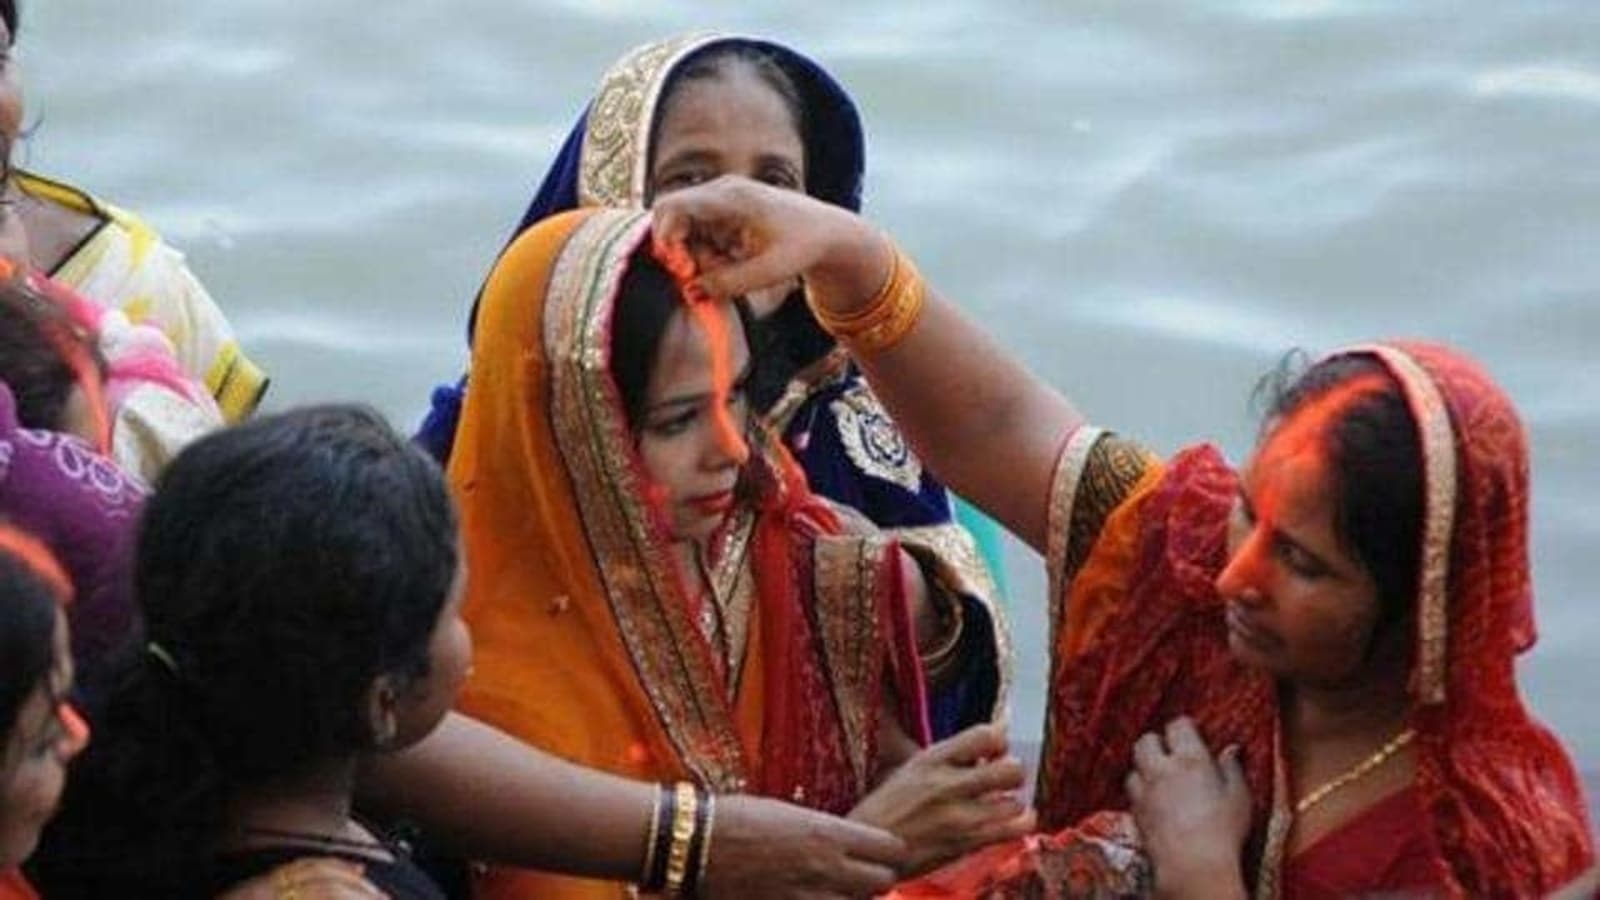 Chhath Puja 2021 Day 3 Devotees To Offer Arghya To Surya Dev In Evening Know All The Rituals